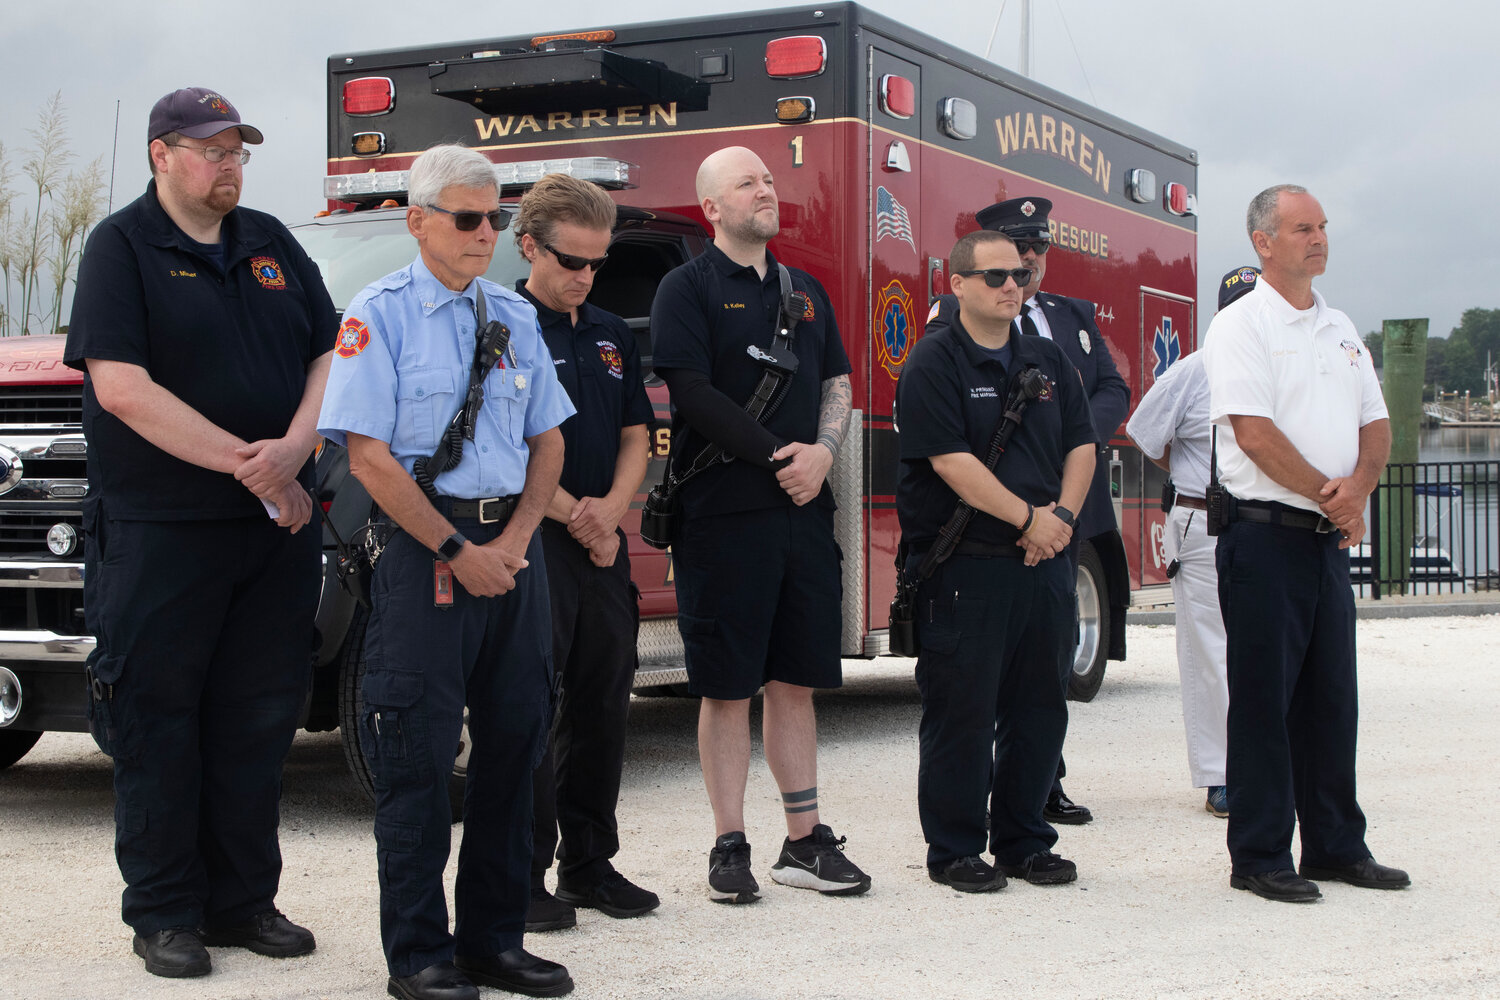 Warren Fire Department and EMS personnel, along with Chief Sousa, stoically take in the remembrance event.